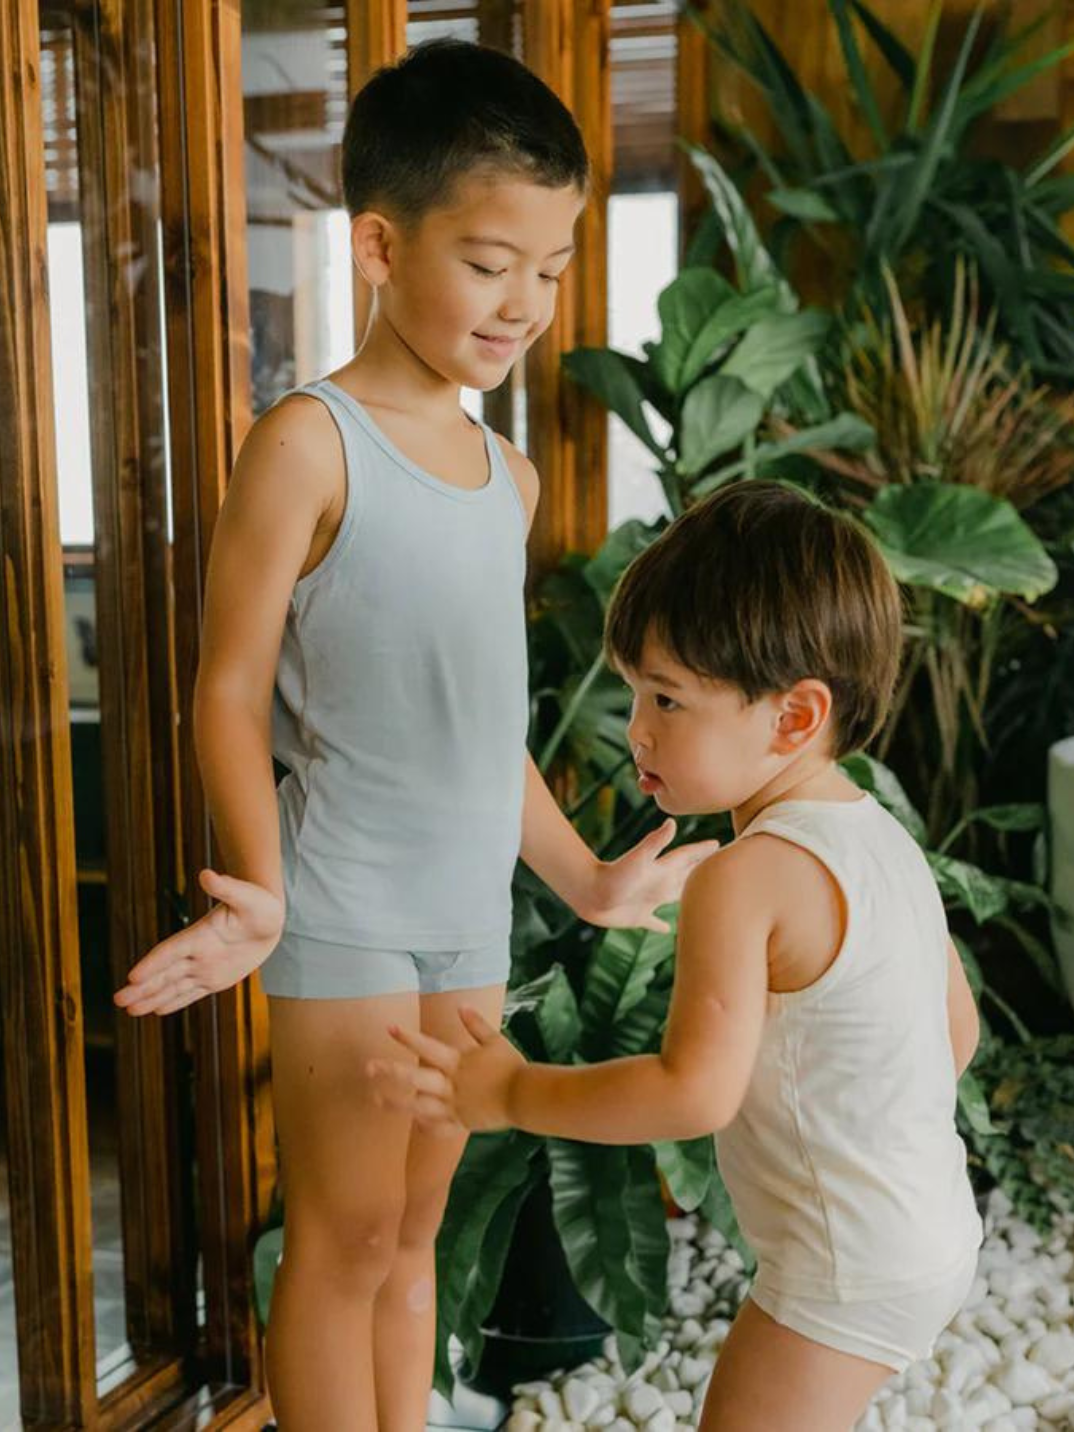 These tank tops are super soft and gentle on your little ones' skin. Designed with a loose, unisex fit for play, movement and a comfy night's rest. Wear the breathable layer under garments for day or snooze in the ultimate comfort. Made with eco modal fabric. This set comes with: 1x blue tank top and 1x cream tank top.